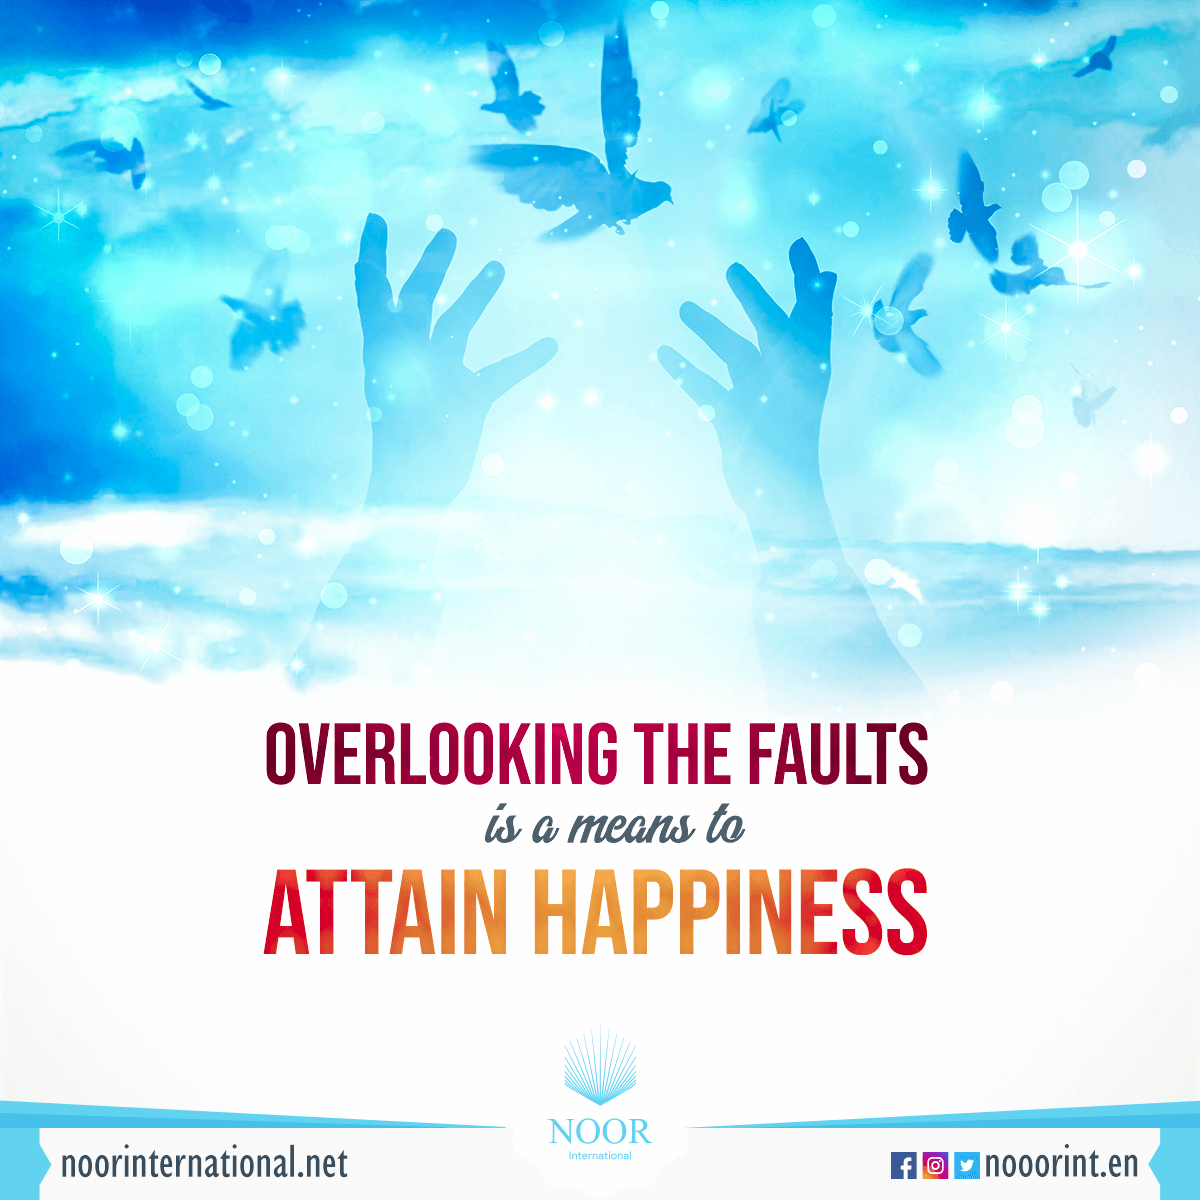 Overlooking the faults is a means to attain happiness